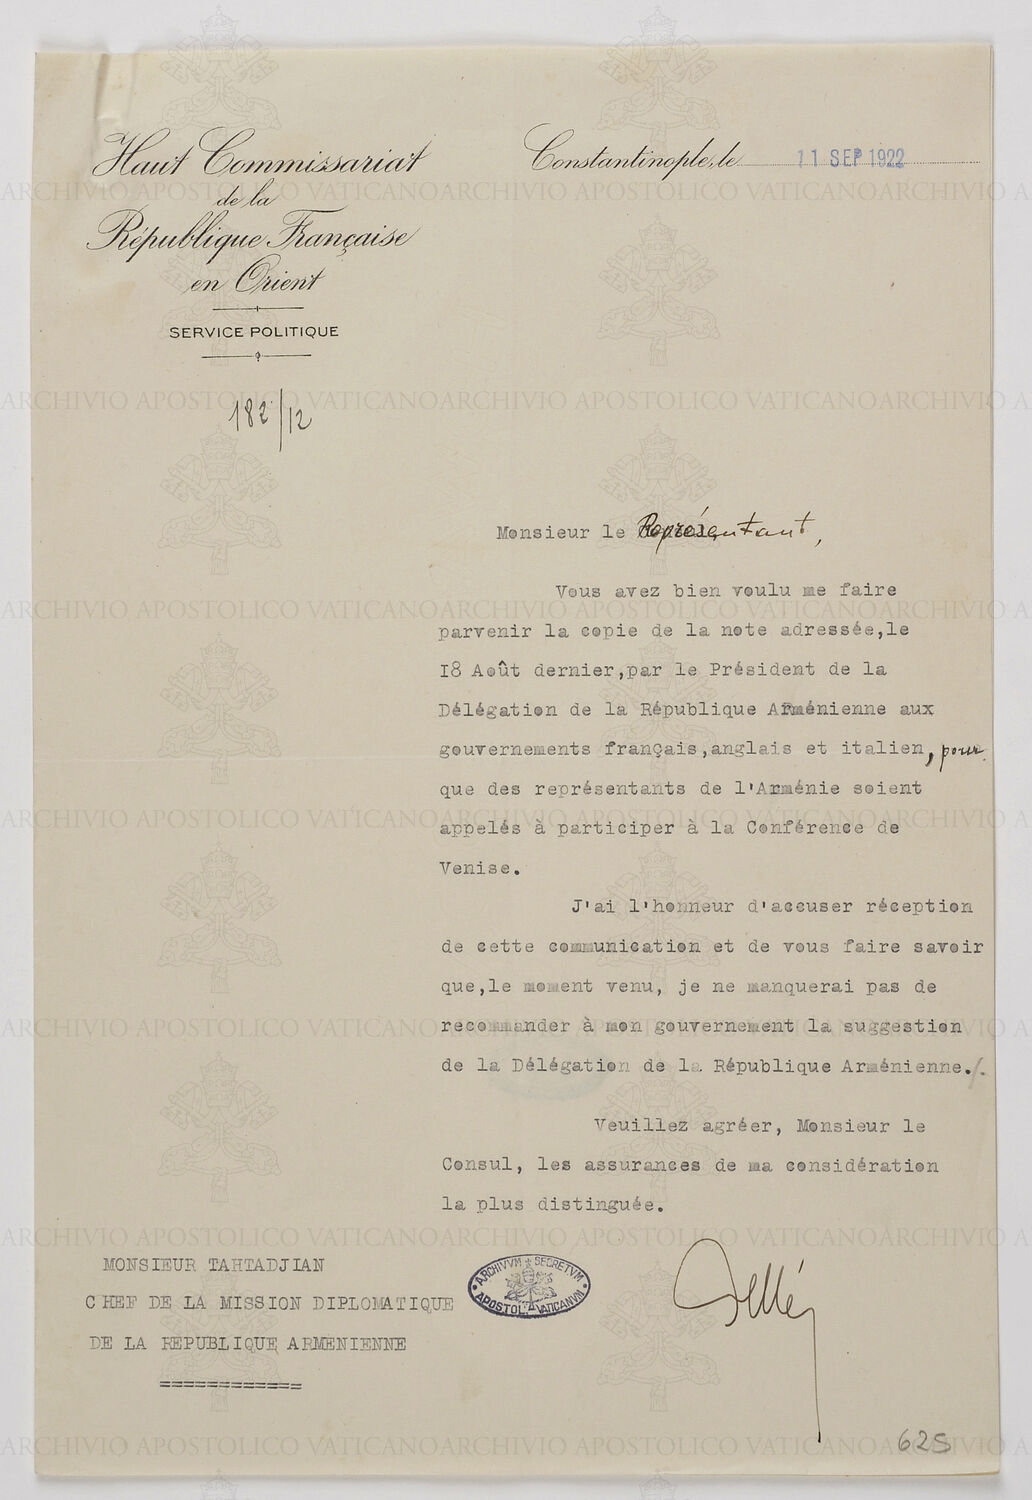 Communication from the High Commissioners on Armenian delegation in peace tables, 1922. Archivio Apostolico Vaticano